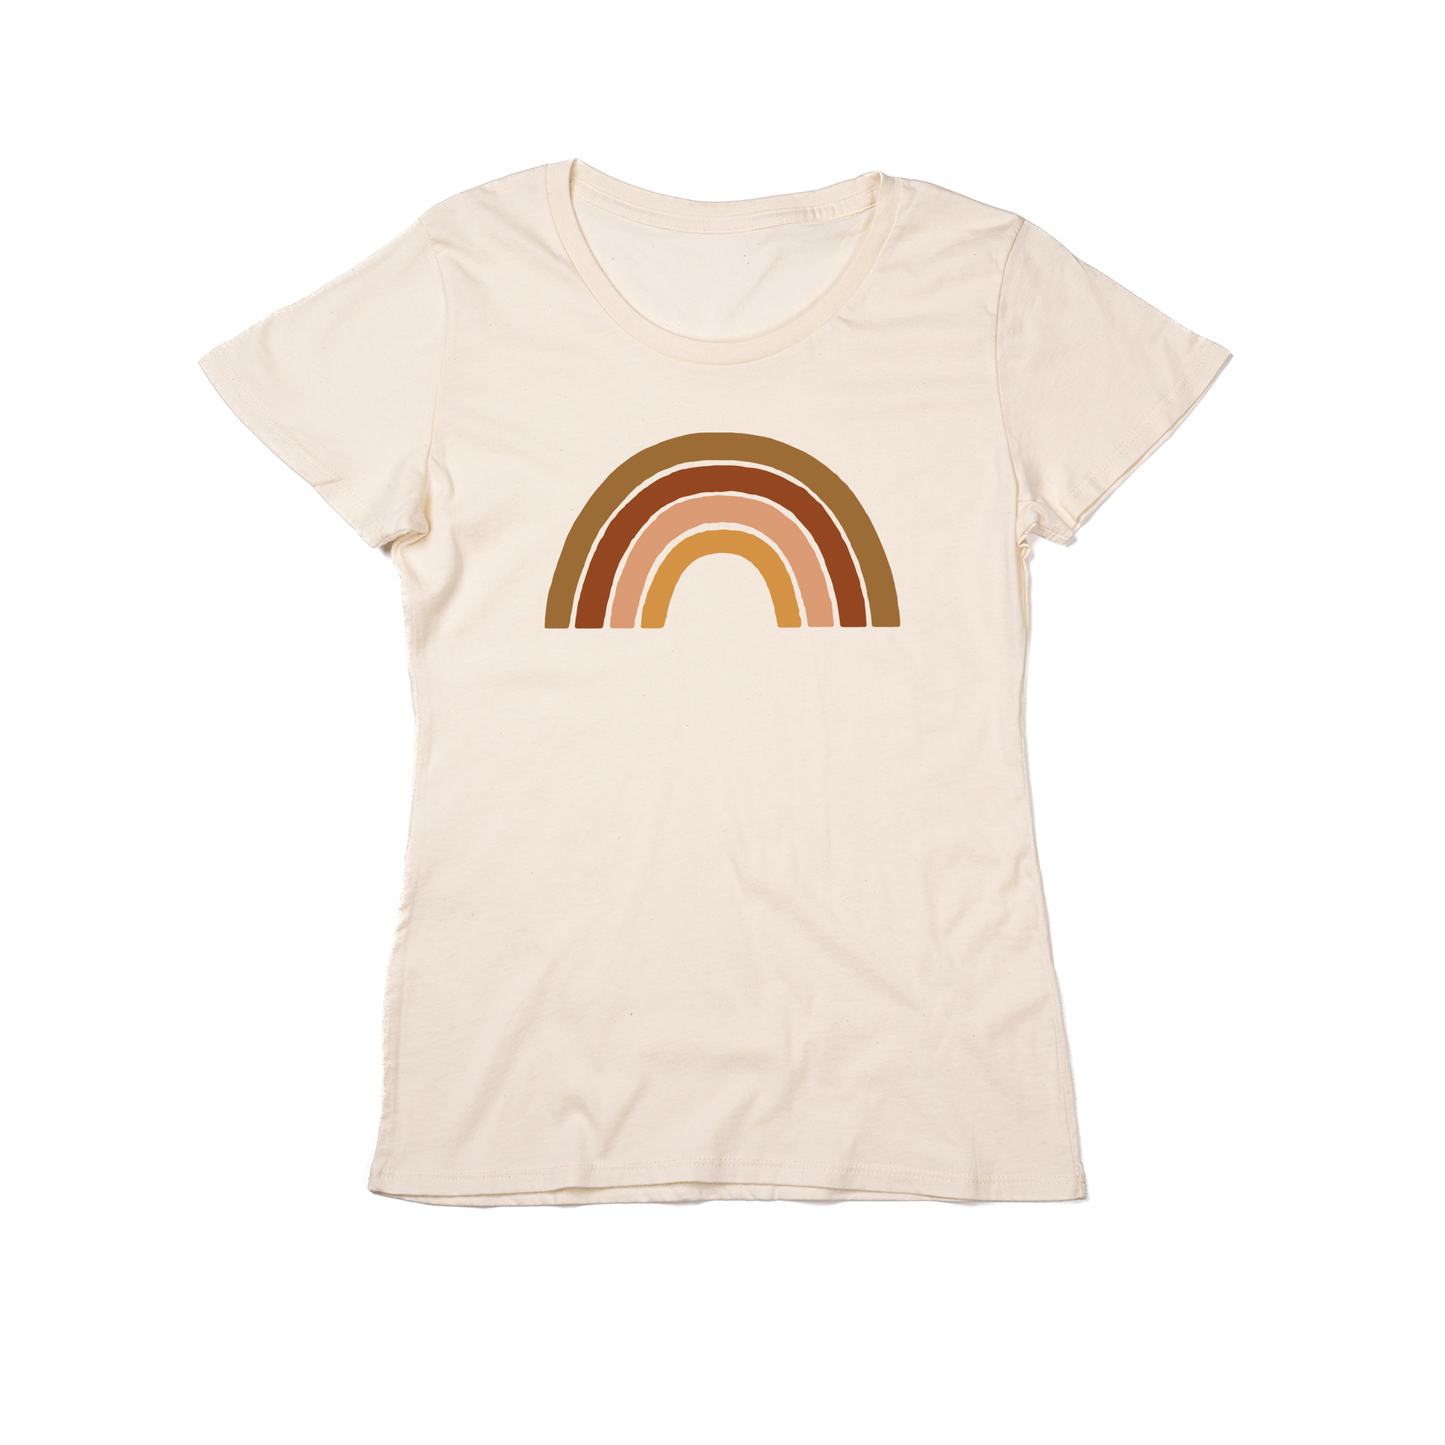 Rainbow (5 Color Options, Color Option #2) - Women's Fitted Tee (Natural)